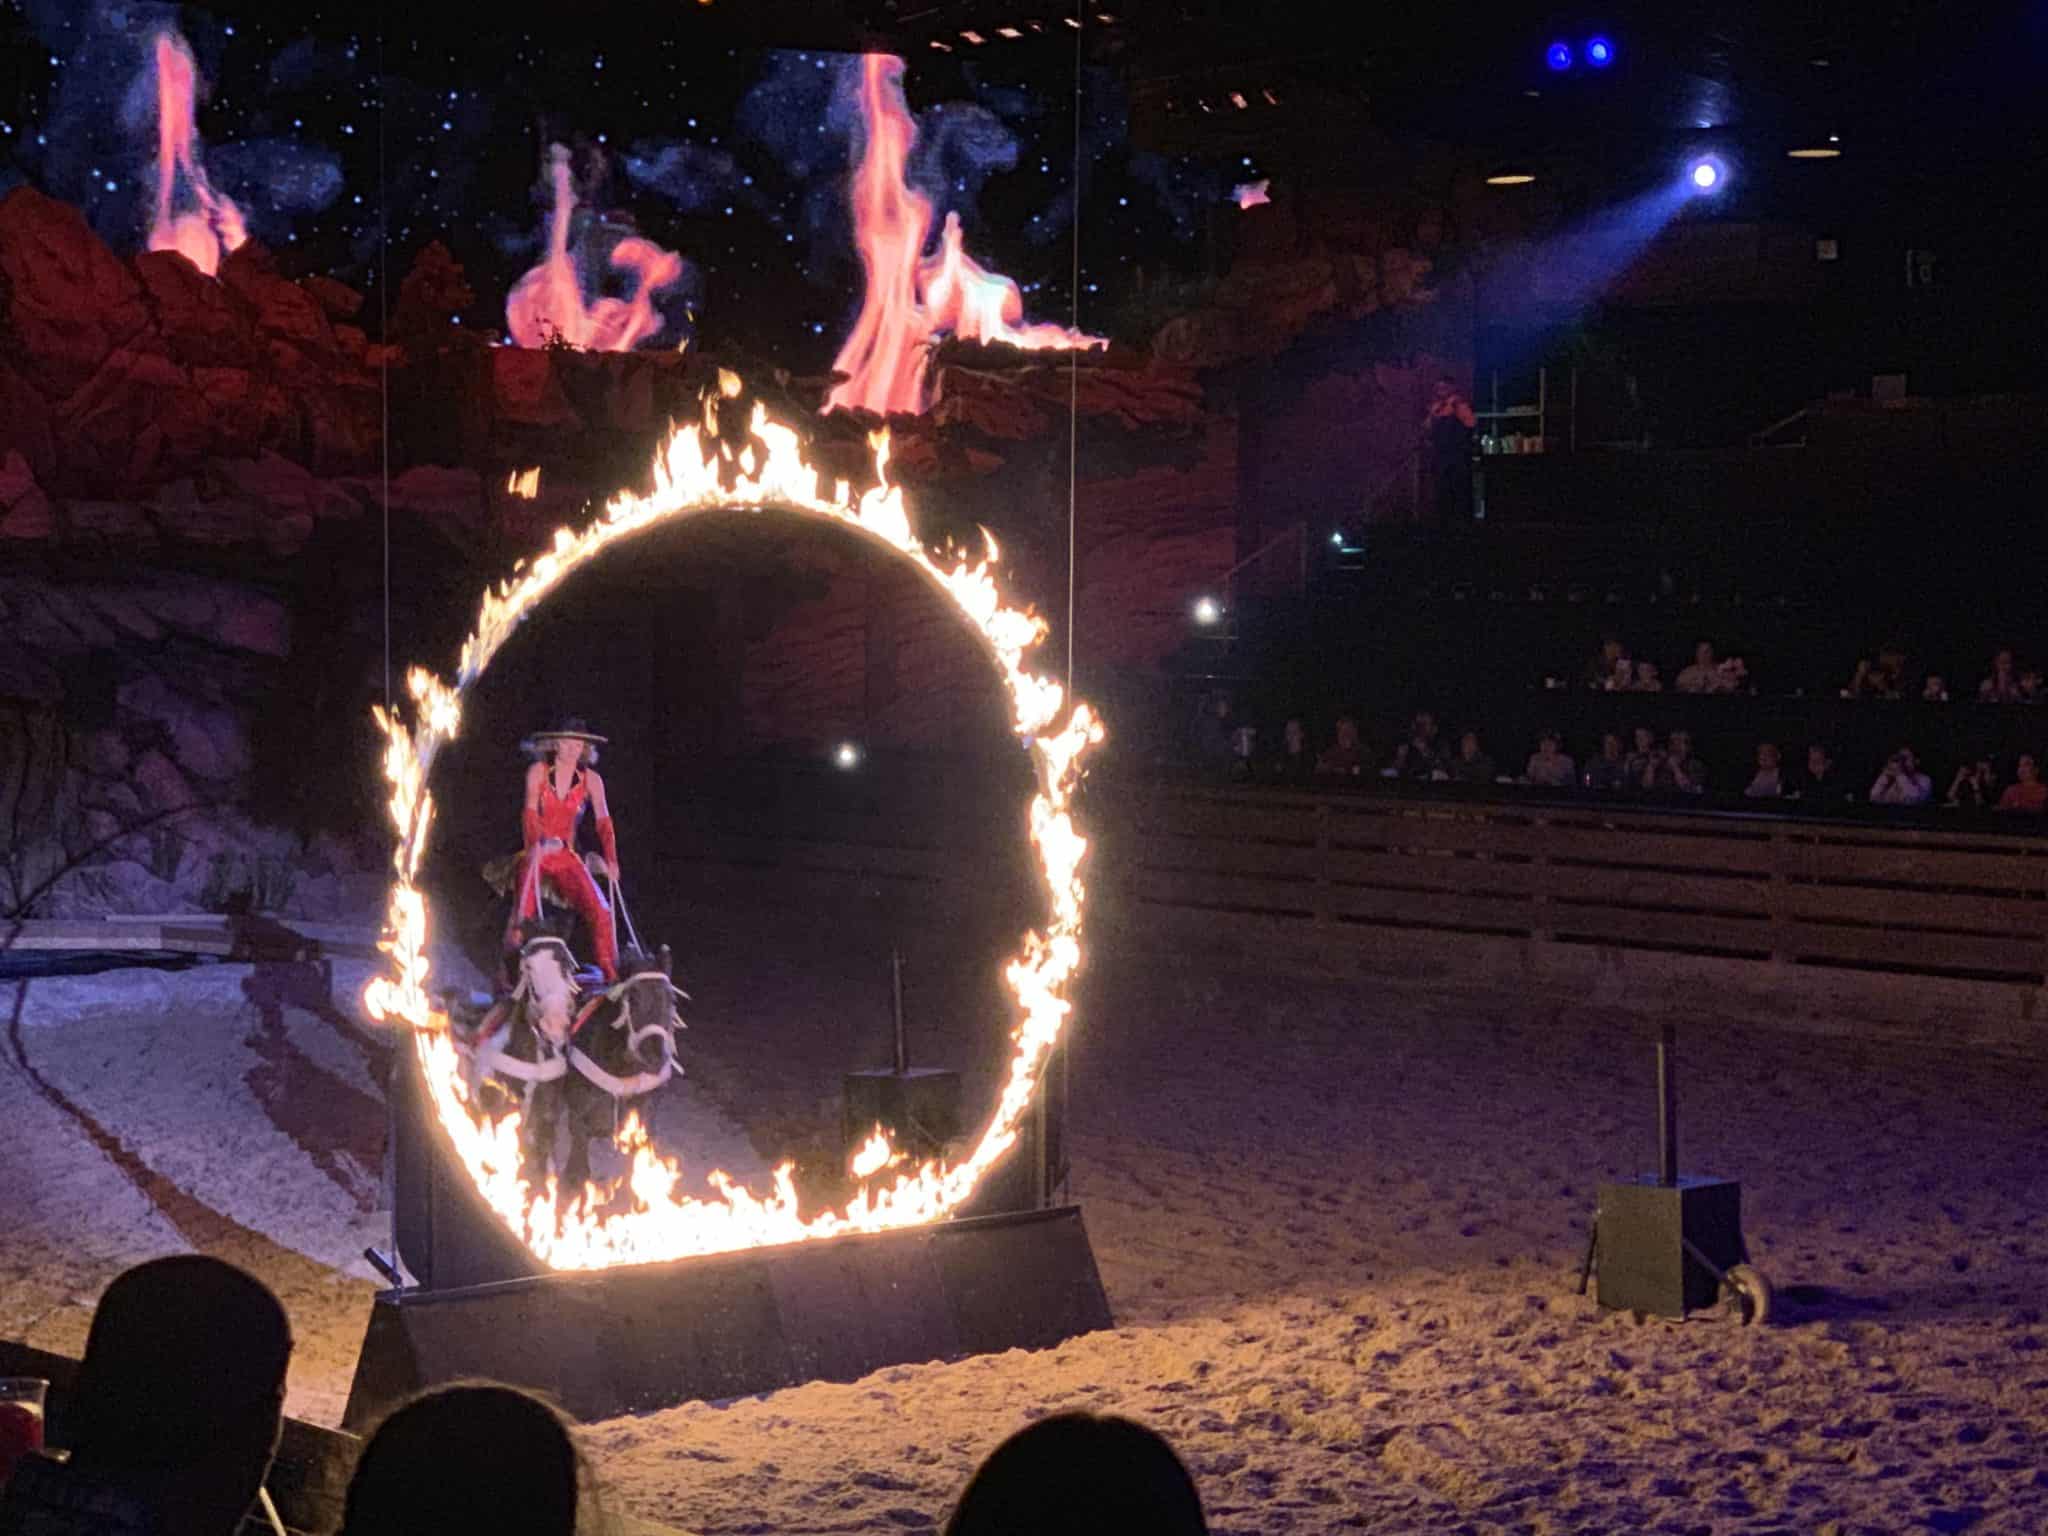 Riding through flames on a horse at Dolly Parton's Stampede in Branson